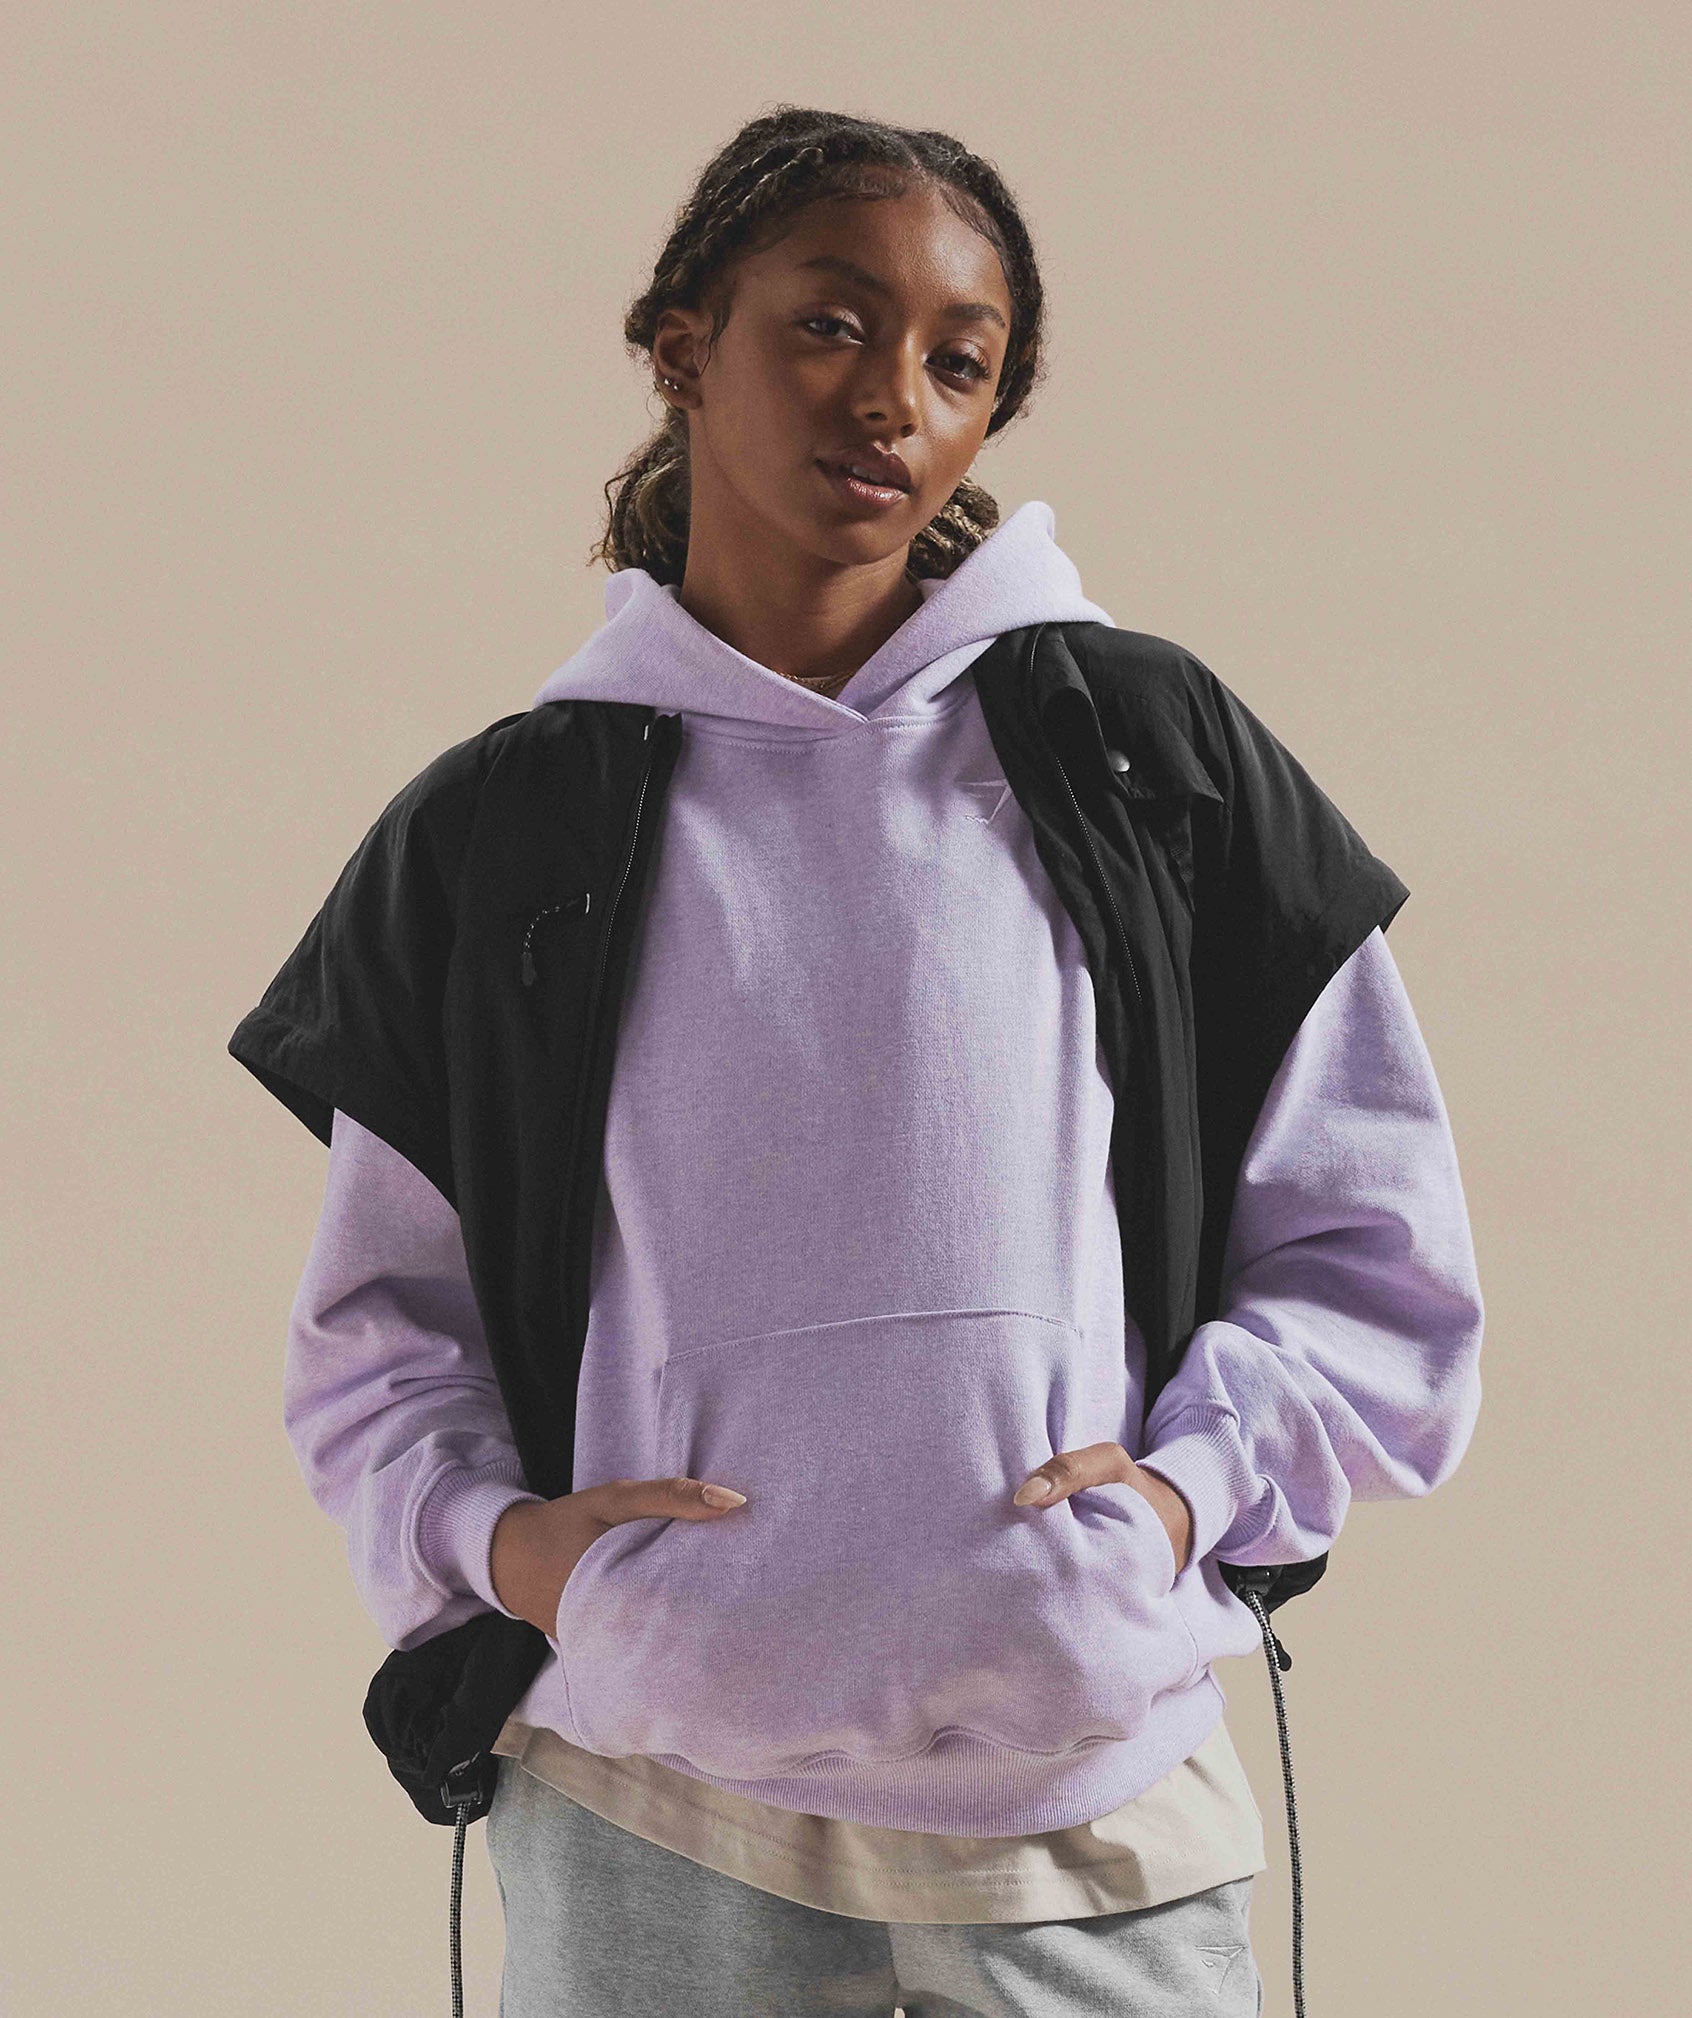 Rest Day Sweats Hoodie in Aura Lilac Marl - view 2